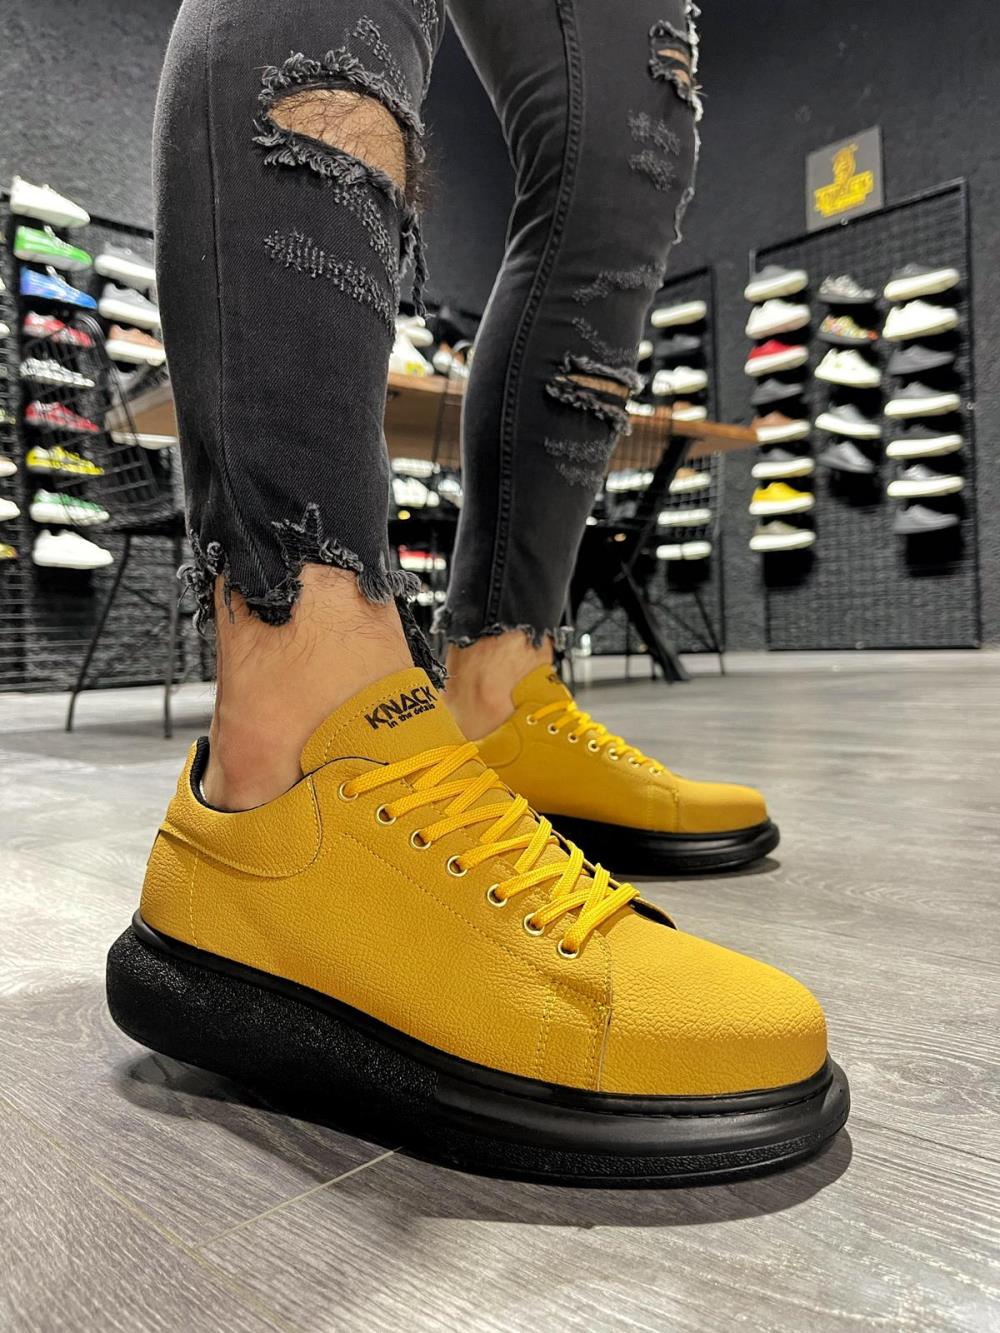 Knack High Sole Casual Shoes 045 Yellow (Black Sole) - STREETMODE™